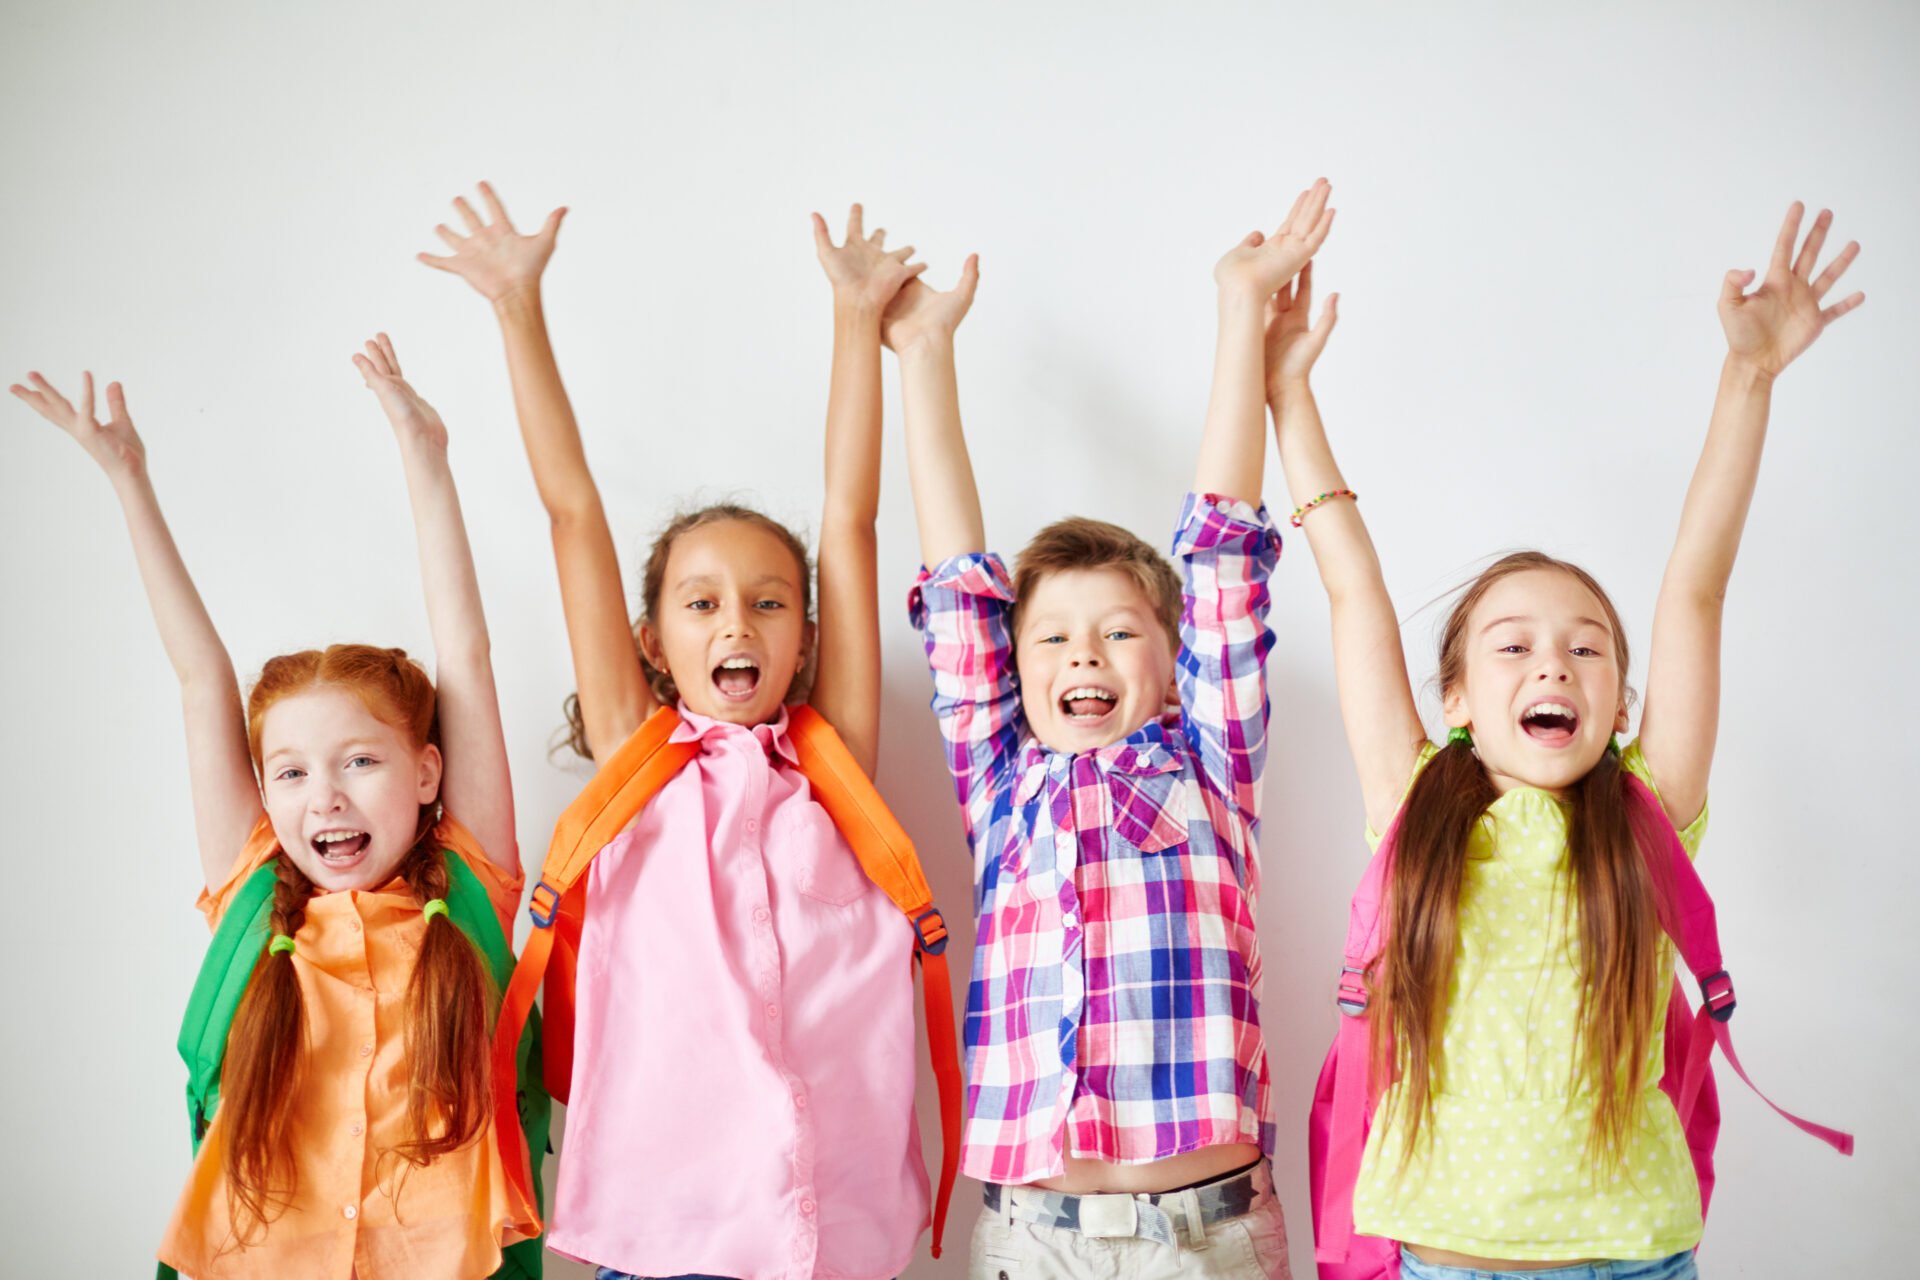 Ecstatic kids with backpacks raising their arms